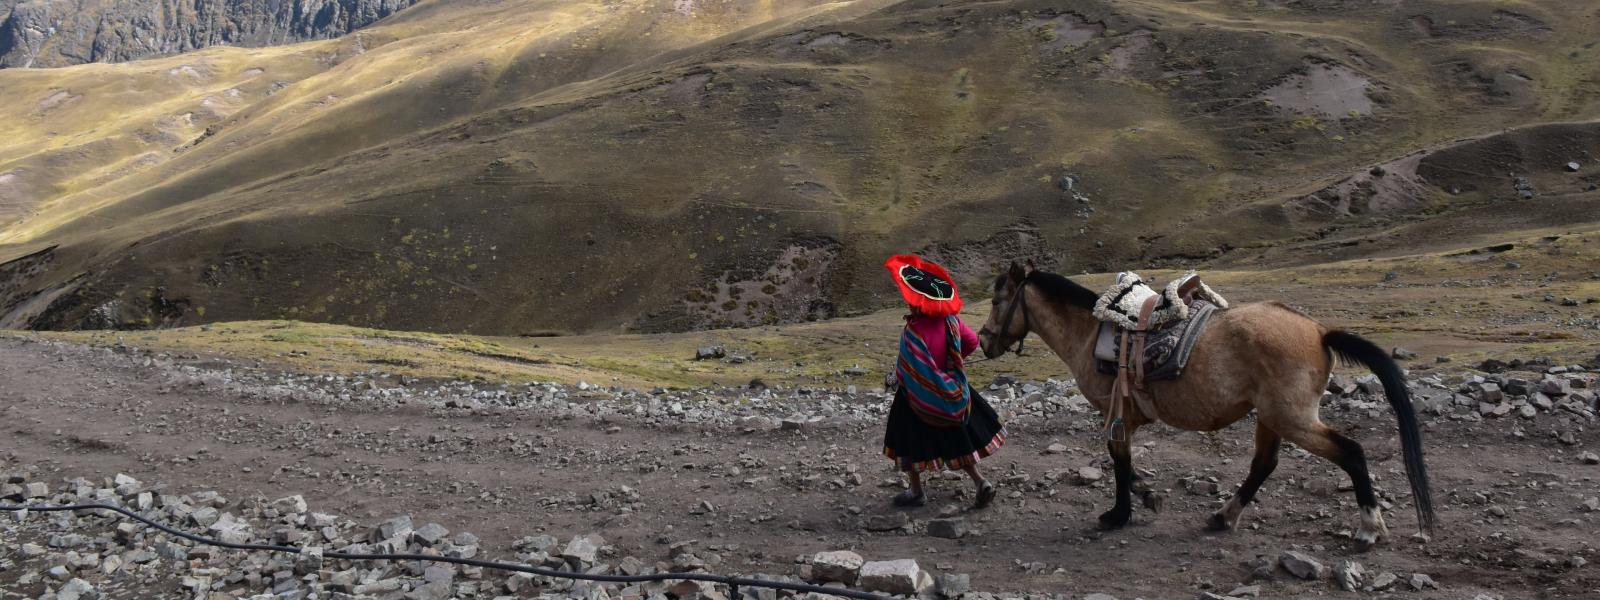 Woman and horse in the mountains of Peru